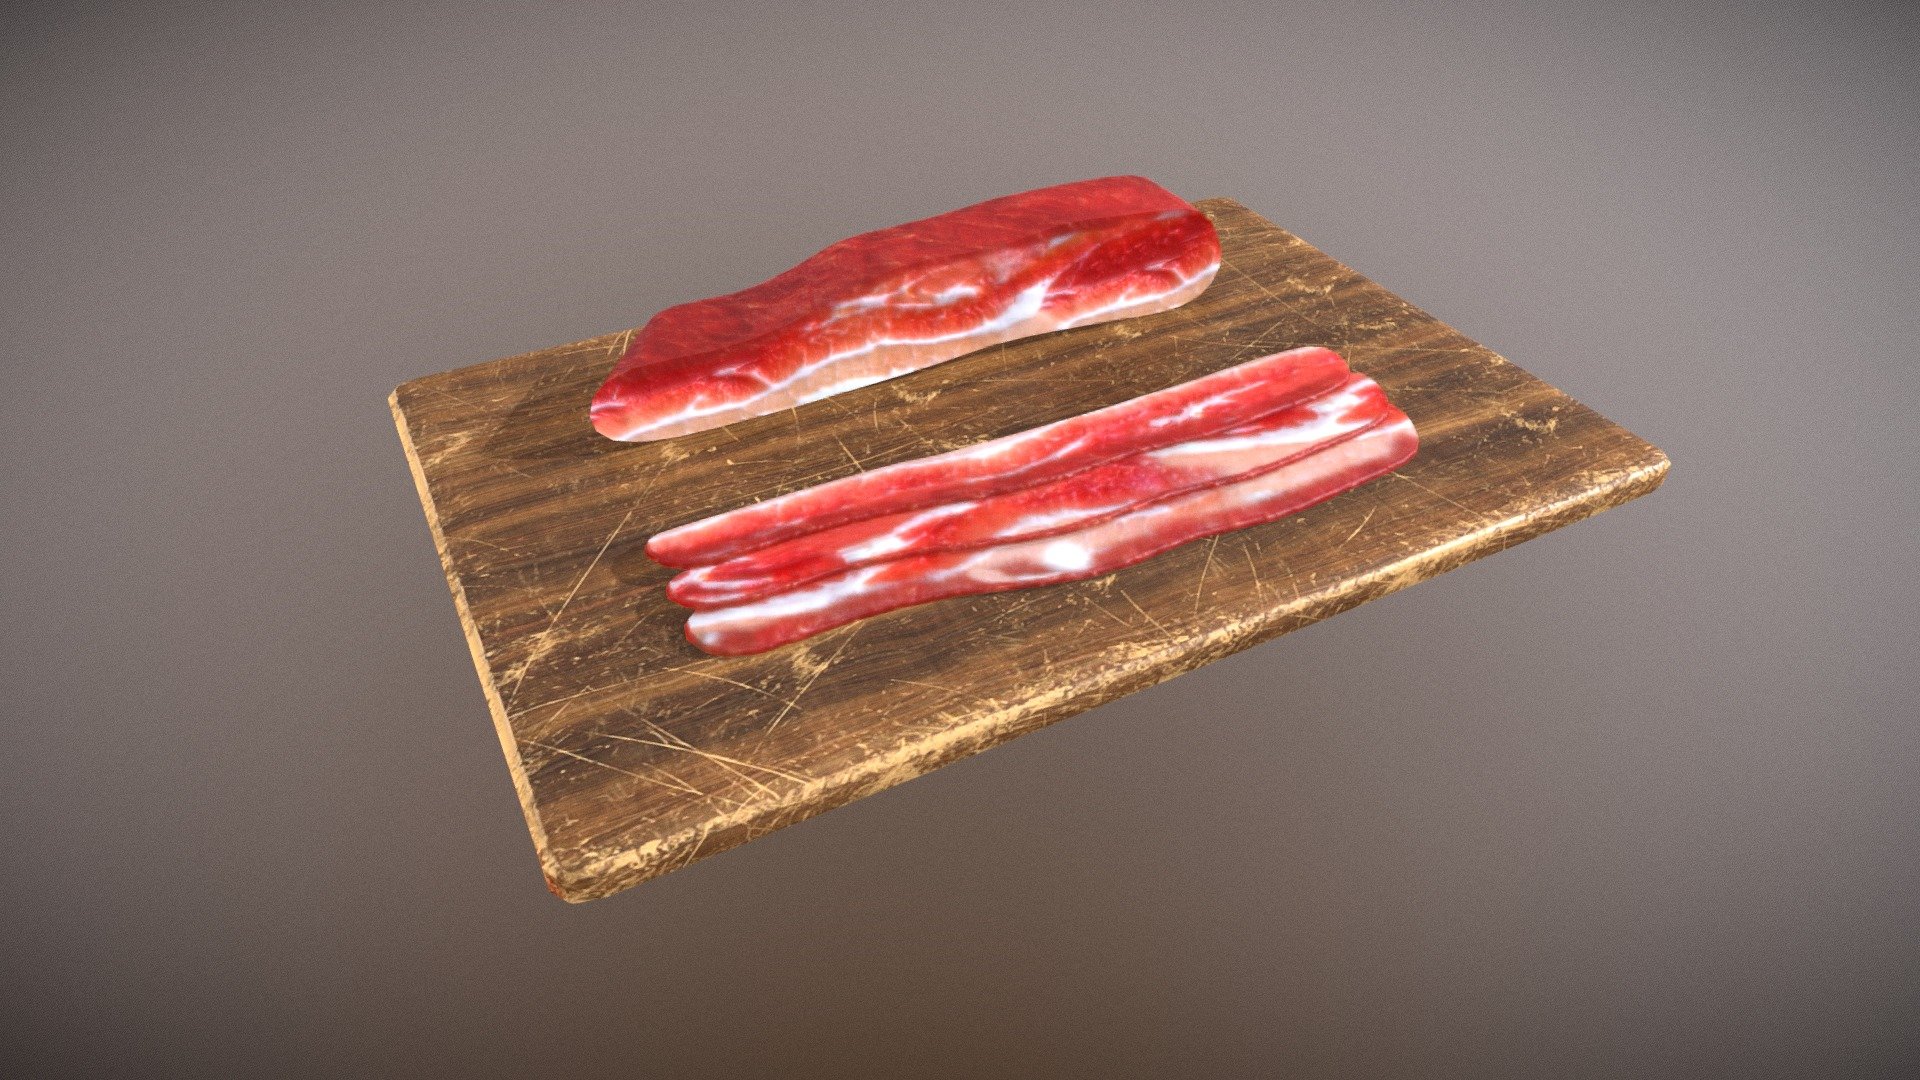 Bacon and Slices on Cutting Board 3D Model PBR Texture

Each single Strip: Verts: 258 Poly: 512 Large Chunk: Verts: 546 Poly: 1088 Board: Verts: 1432 Poly: 220

Entire Mesh: Verts: 2752 Poly: 2844 - Bacon Platter - Buy Royalty Free 3D model by GetDeadEntertainment 3d model